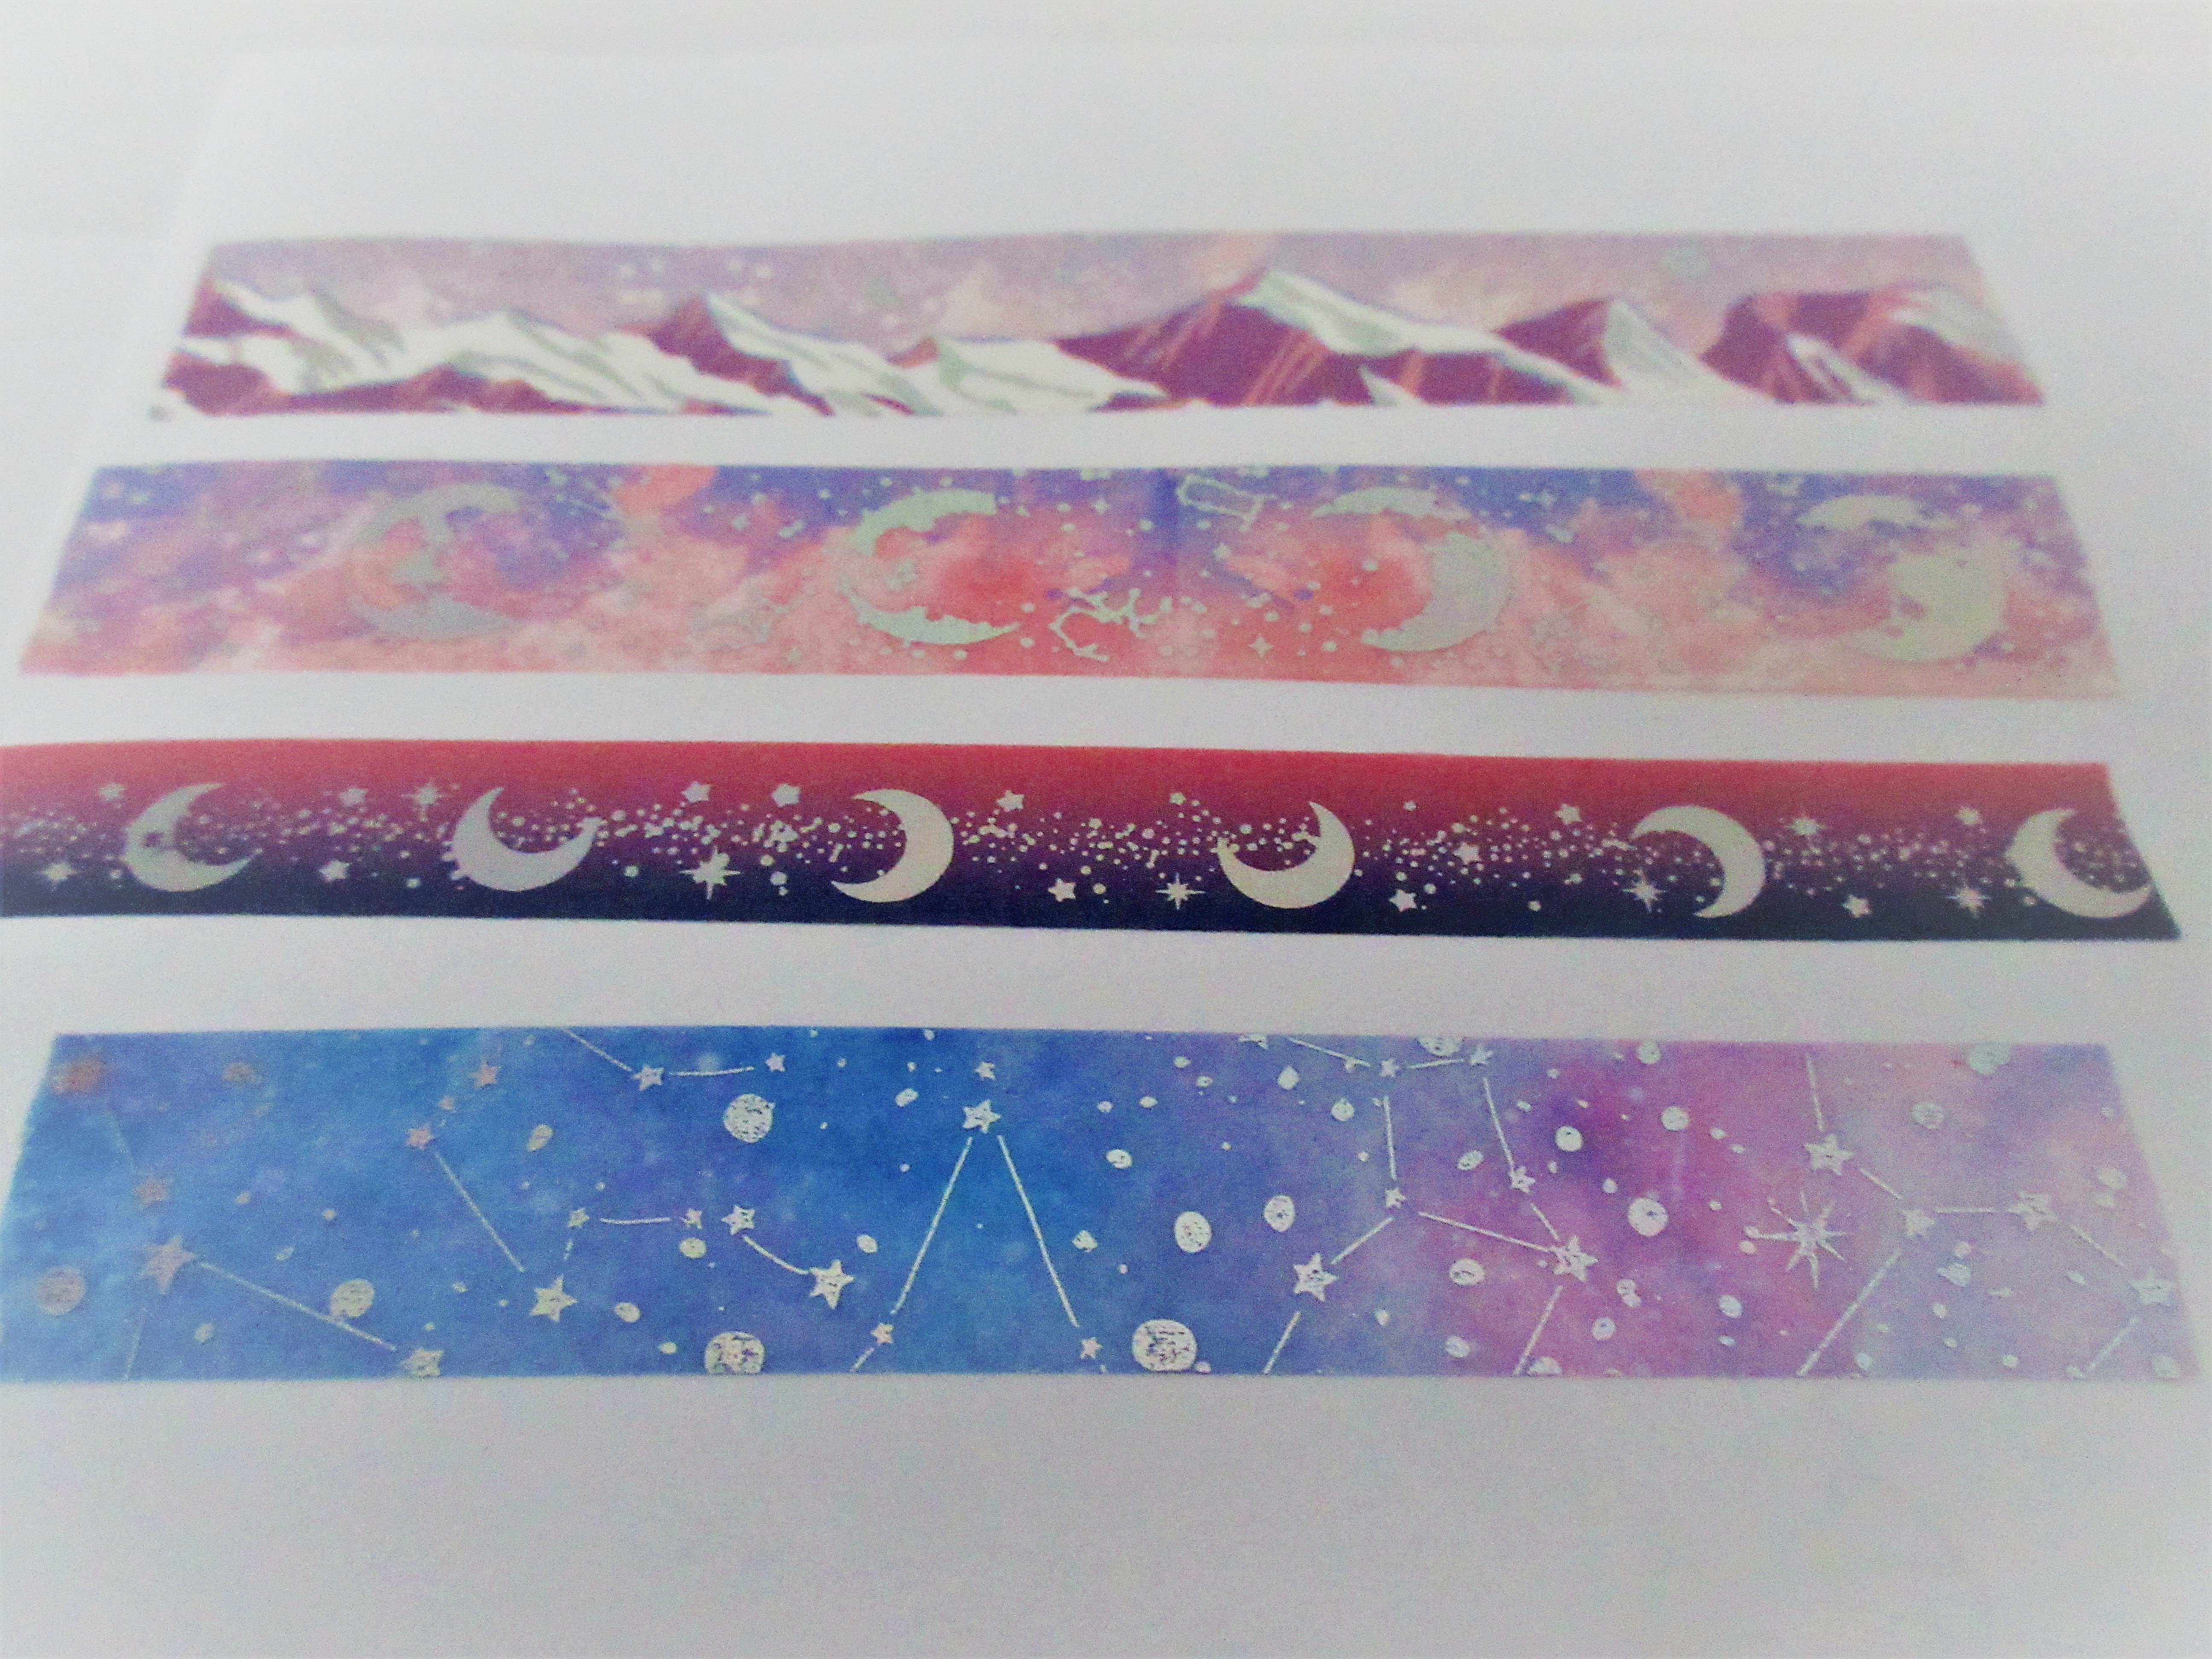 A variety of washi tape samples, including a crescent moon washi tape, with moons on a gradient background, a mountain washi tape sample and a constellations sample